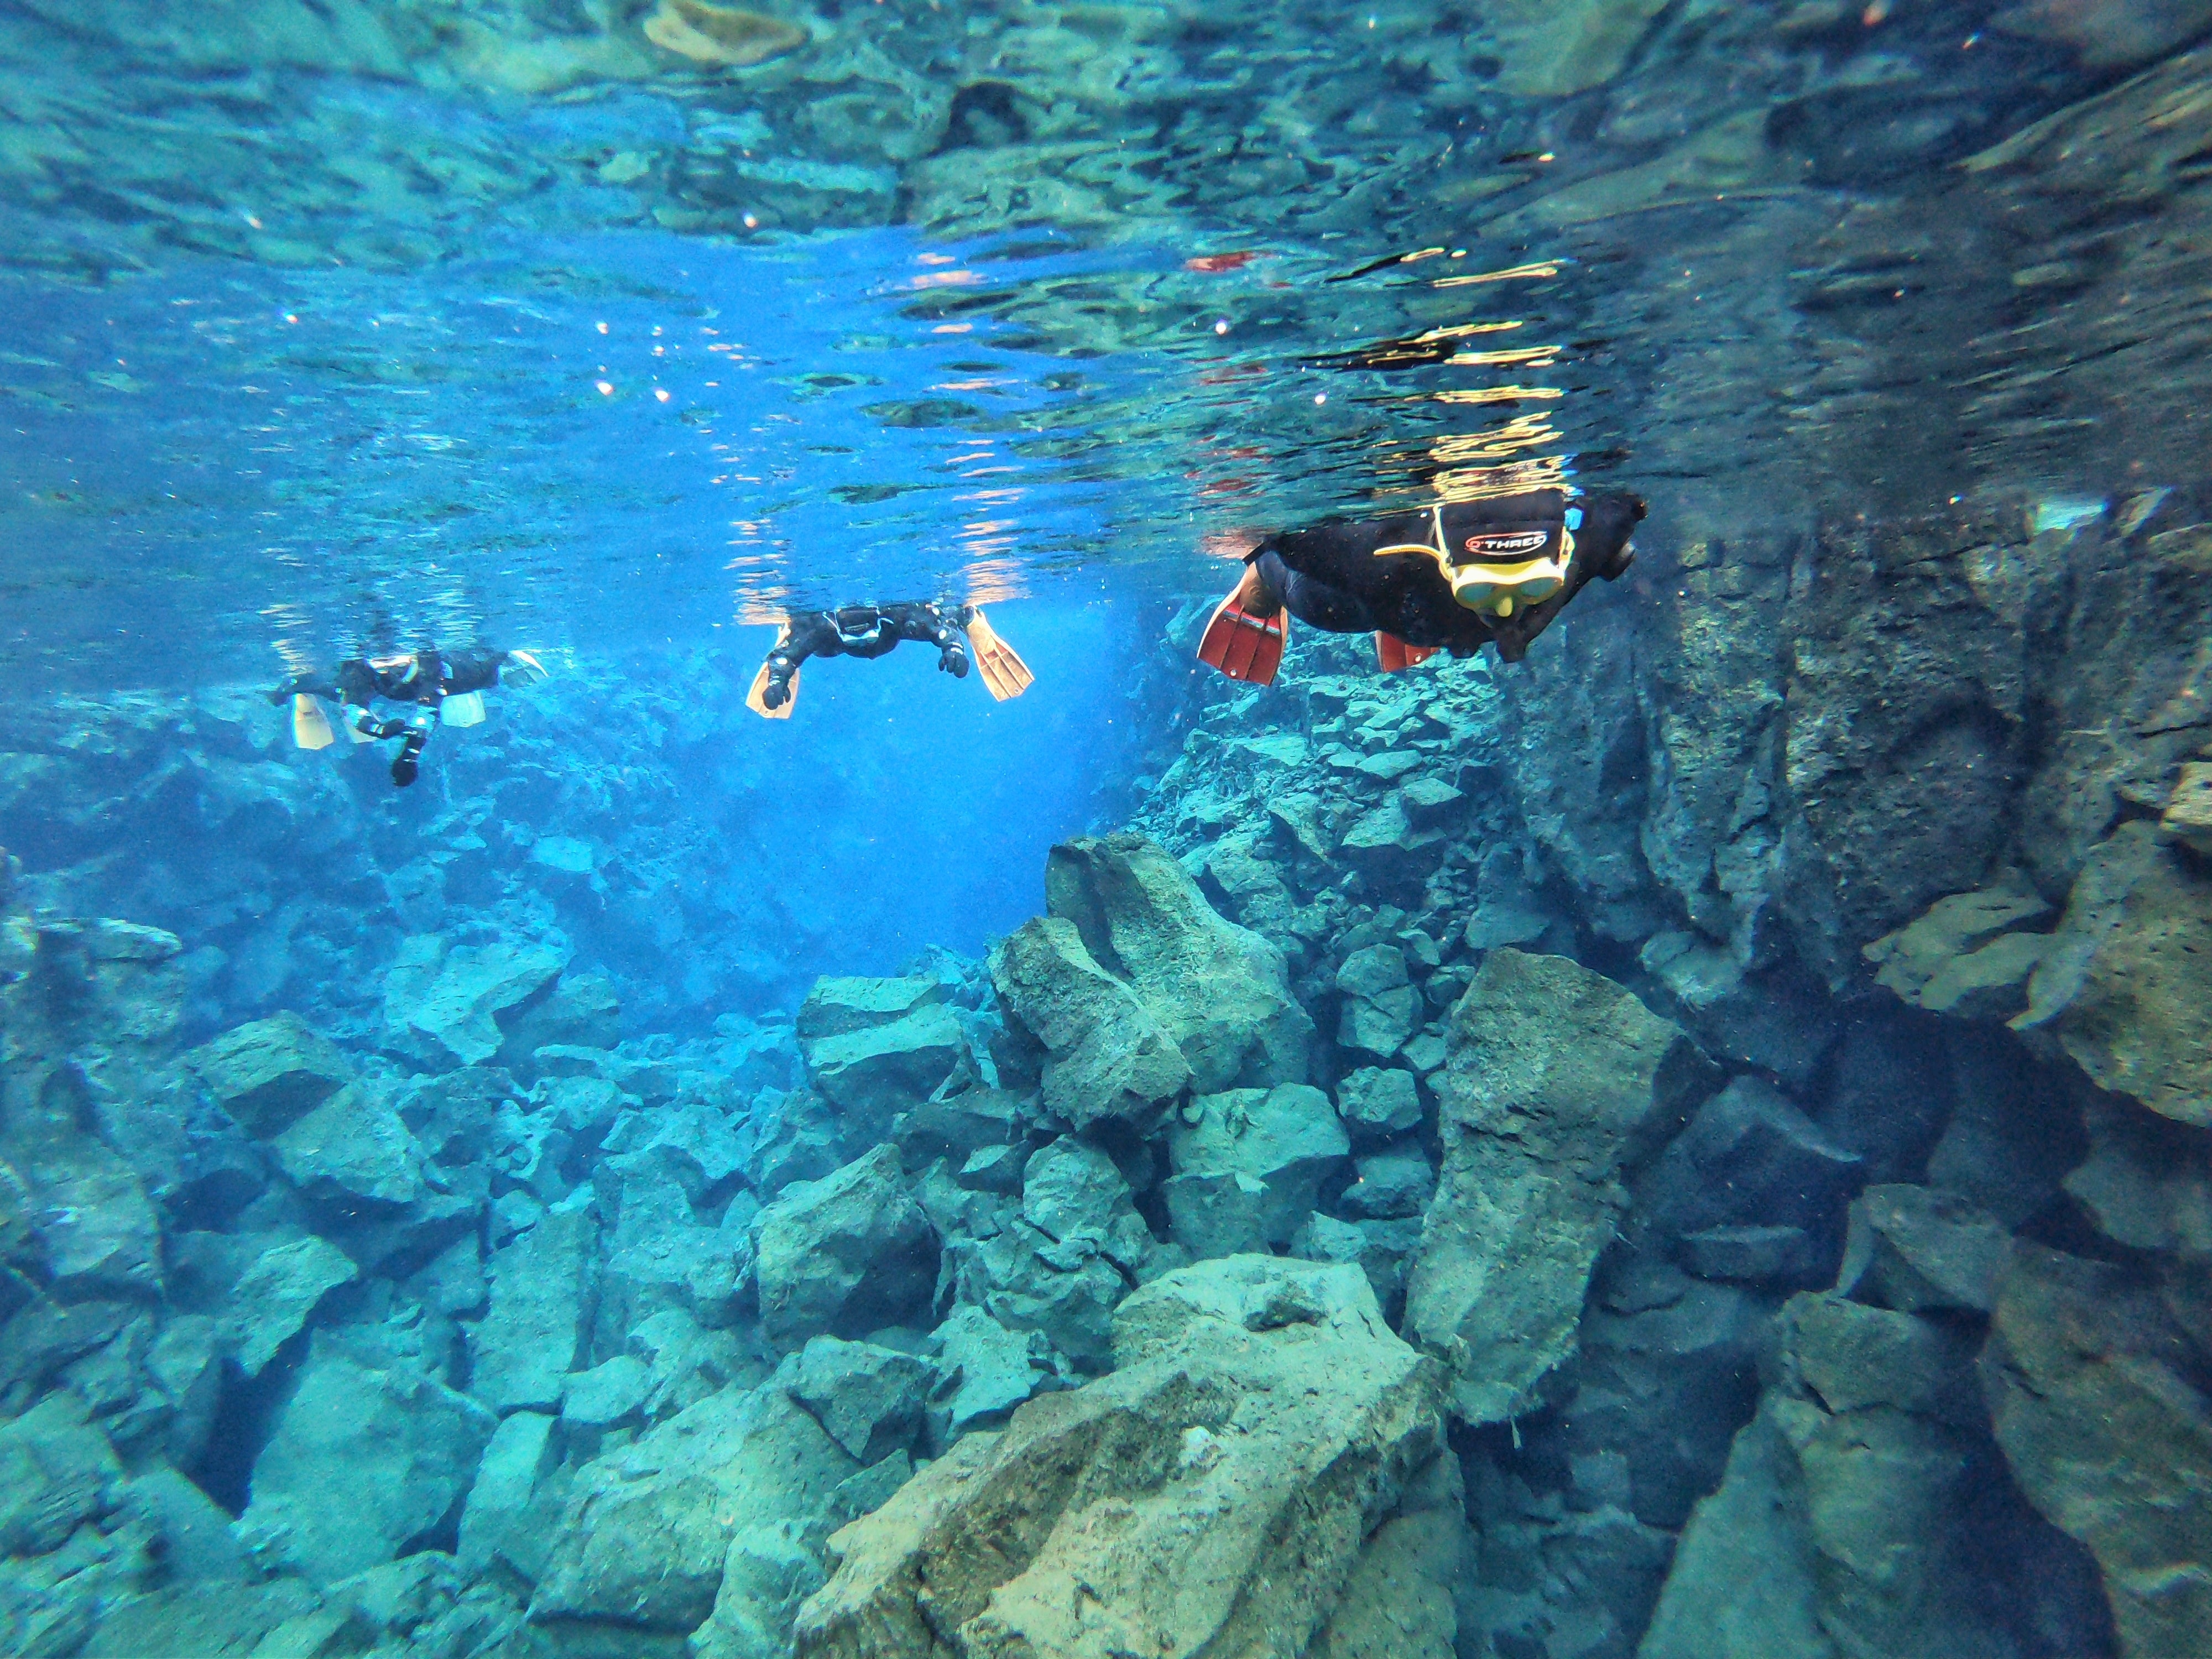 People snorkeling in the Silfra Fissure amid bright blue water and a rocky underwater landscape.